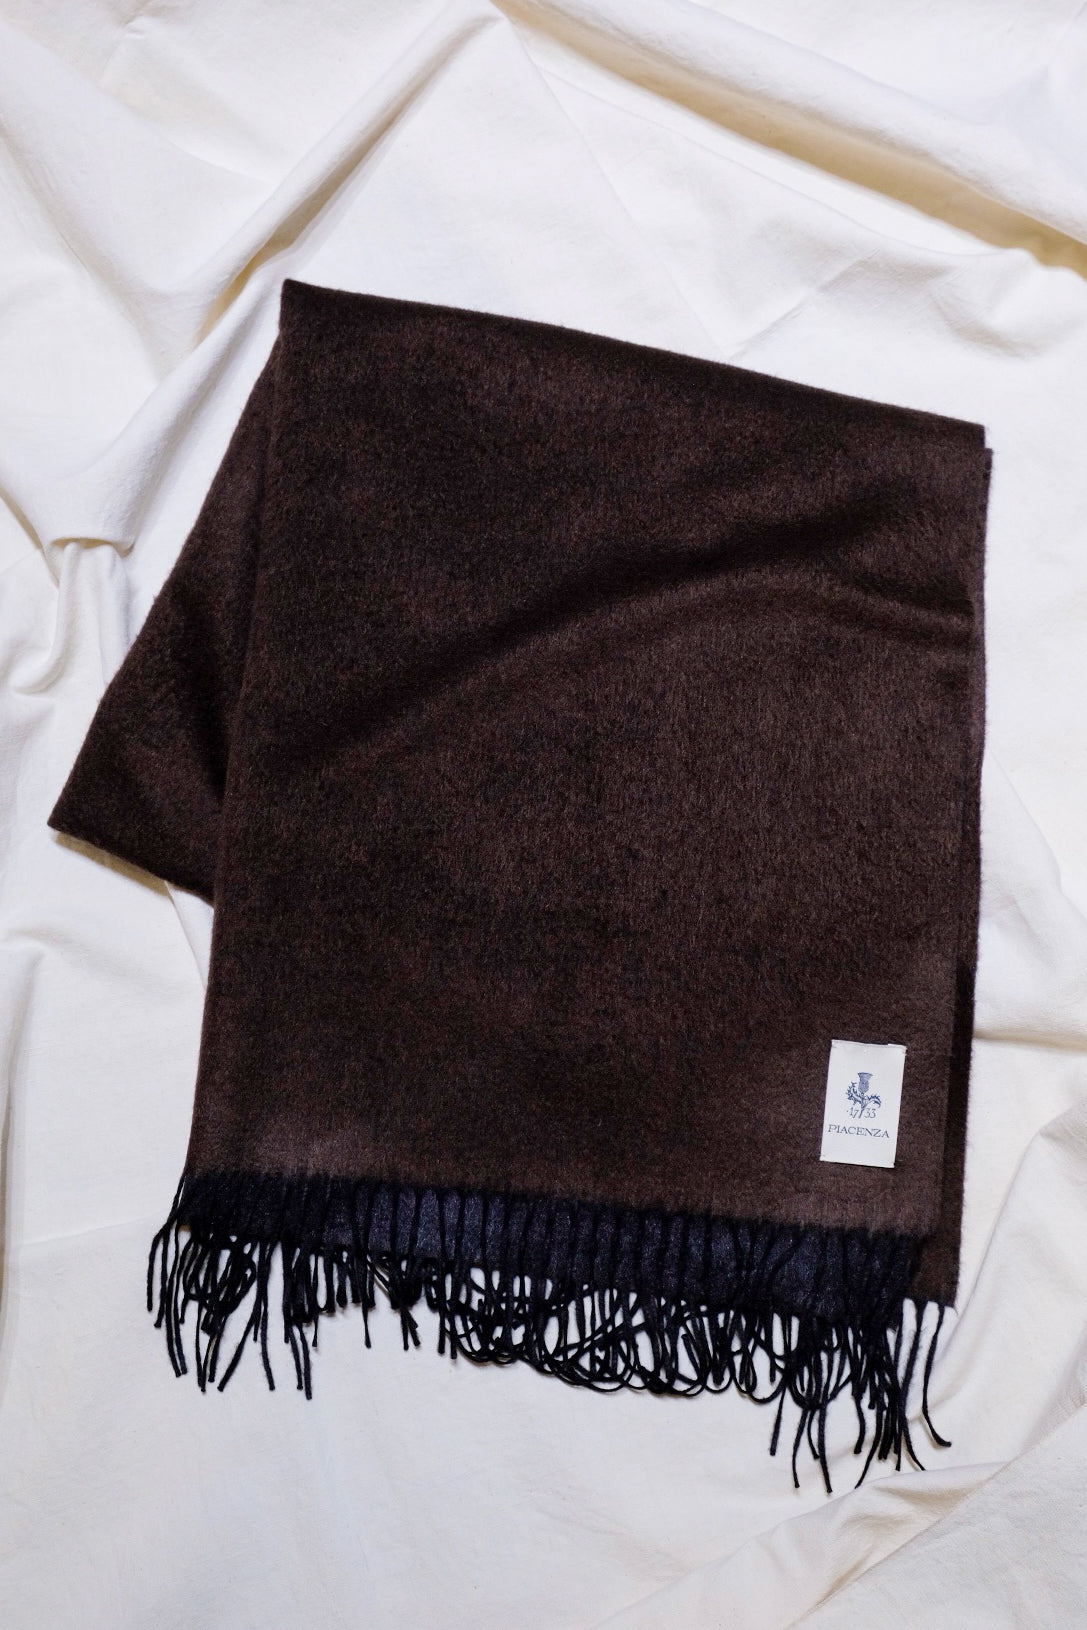 PIACENZA "MIRROR / Cashmere Silk Double-Faced Large Stole / BROWN×CHARCOAL"